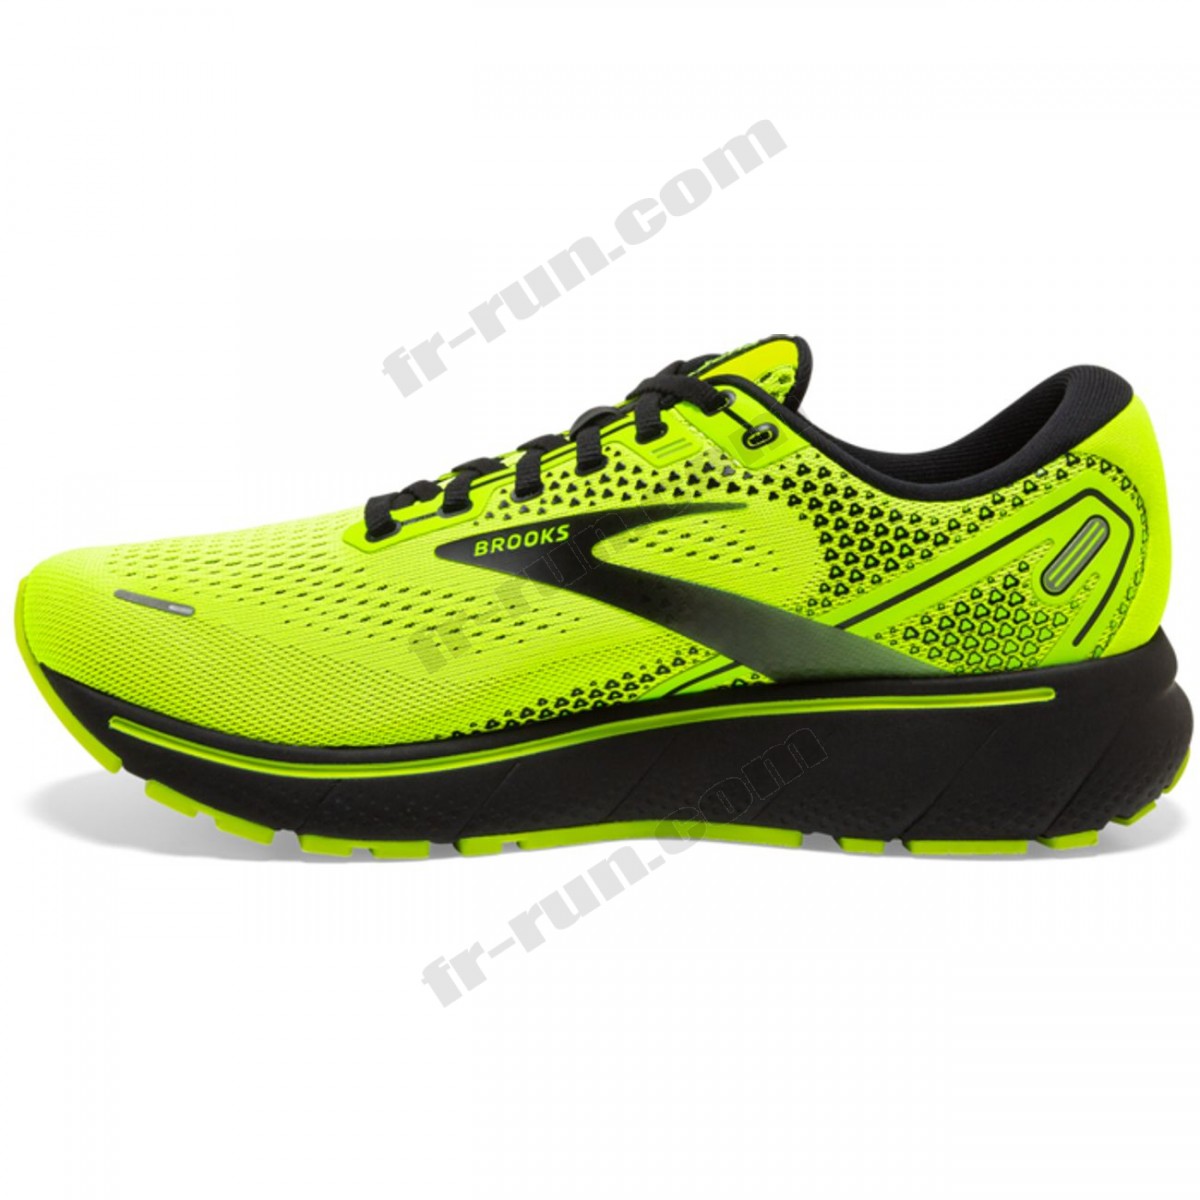 Brooks/CHAUSSURES DE RUNNING homme BROOKS GHOST 14 √ Nouveau style √ Soldes - -2